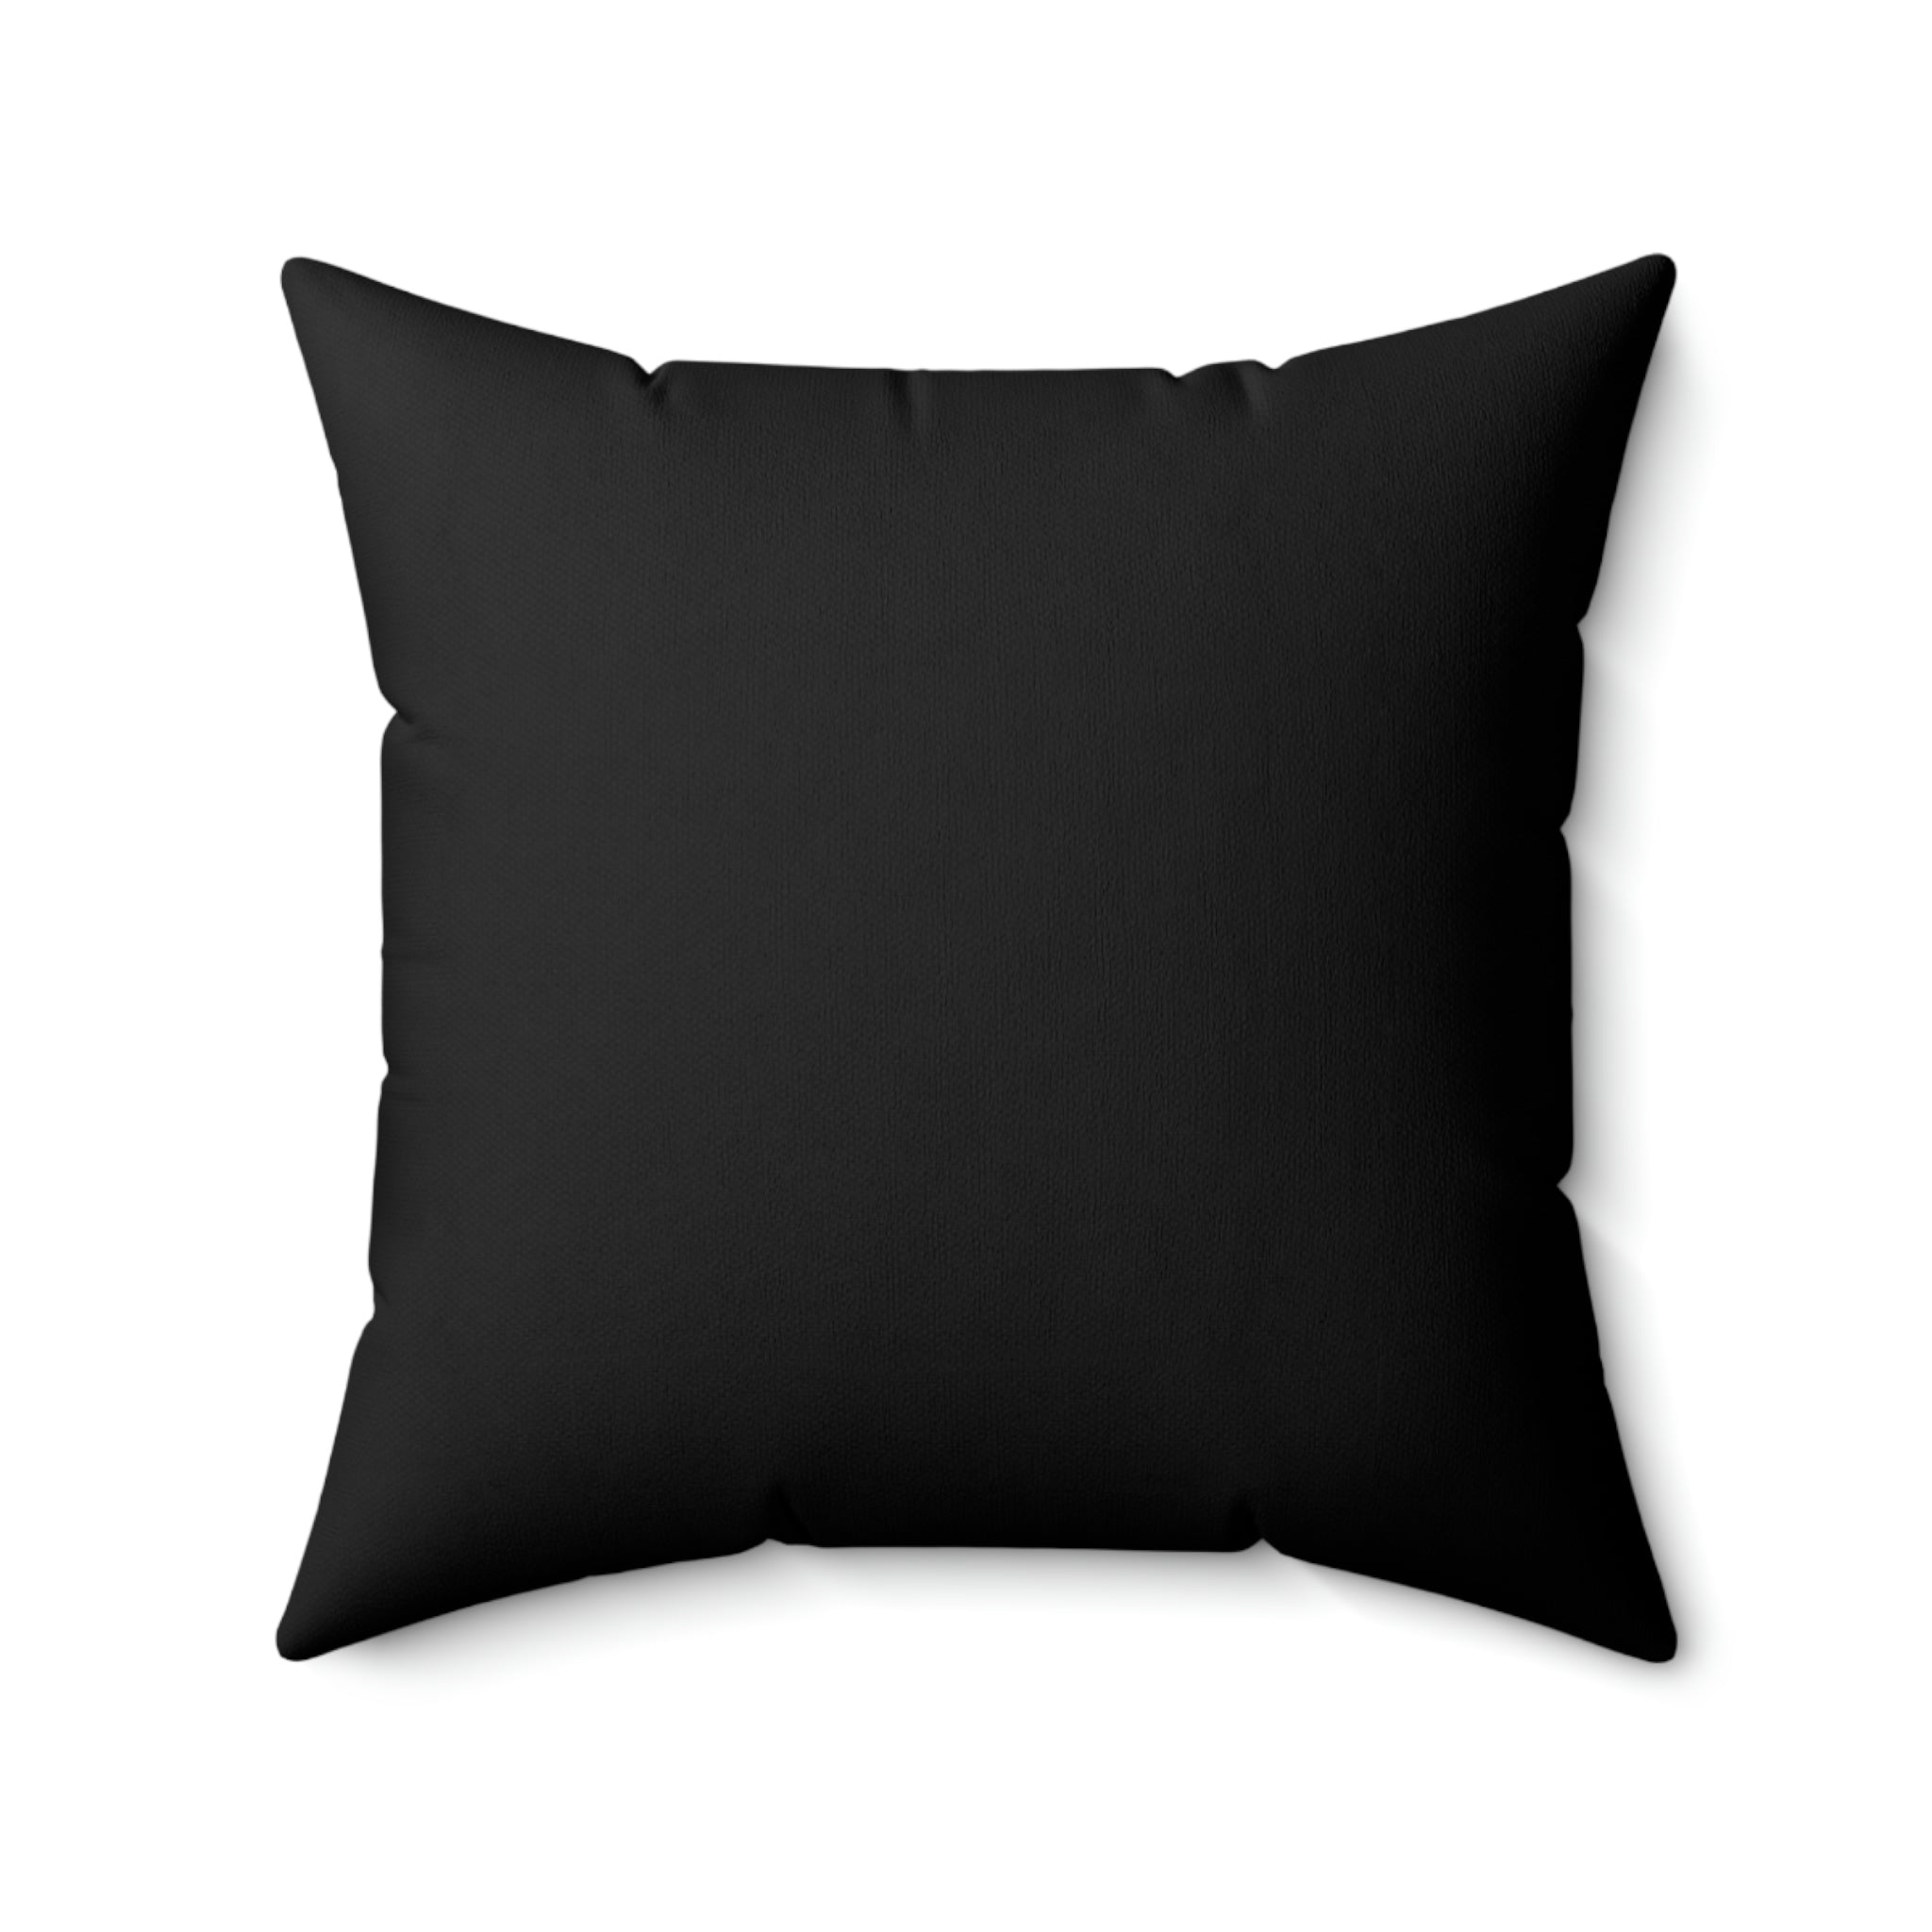 Young Girl Witch Throw Pillow, Black Square Multi-Size - Durazza